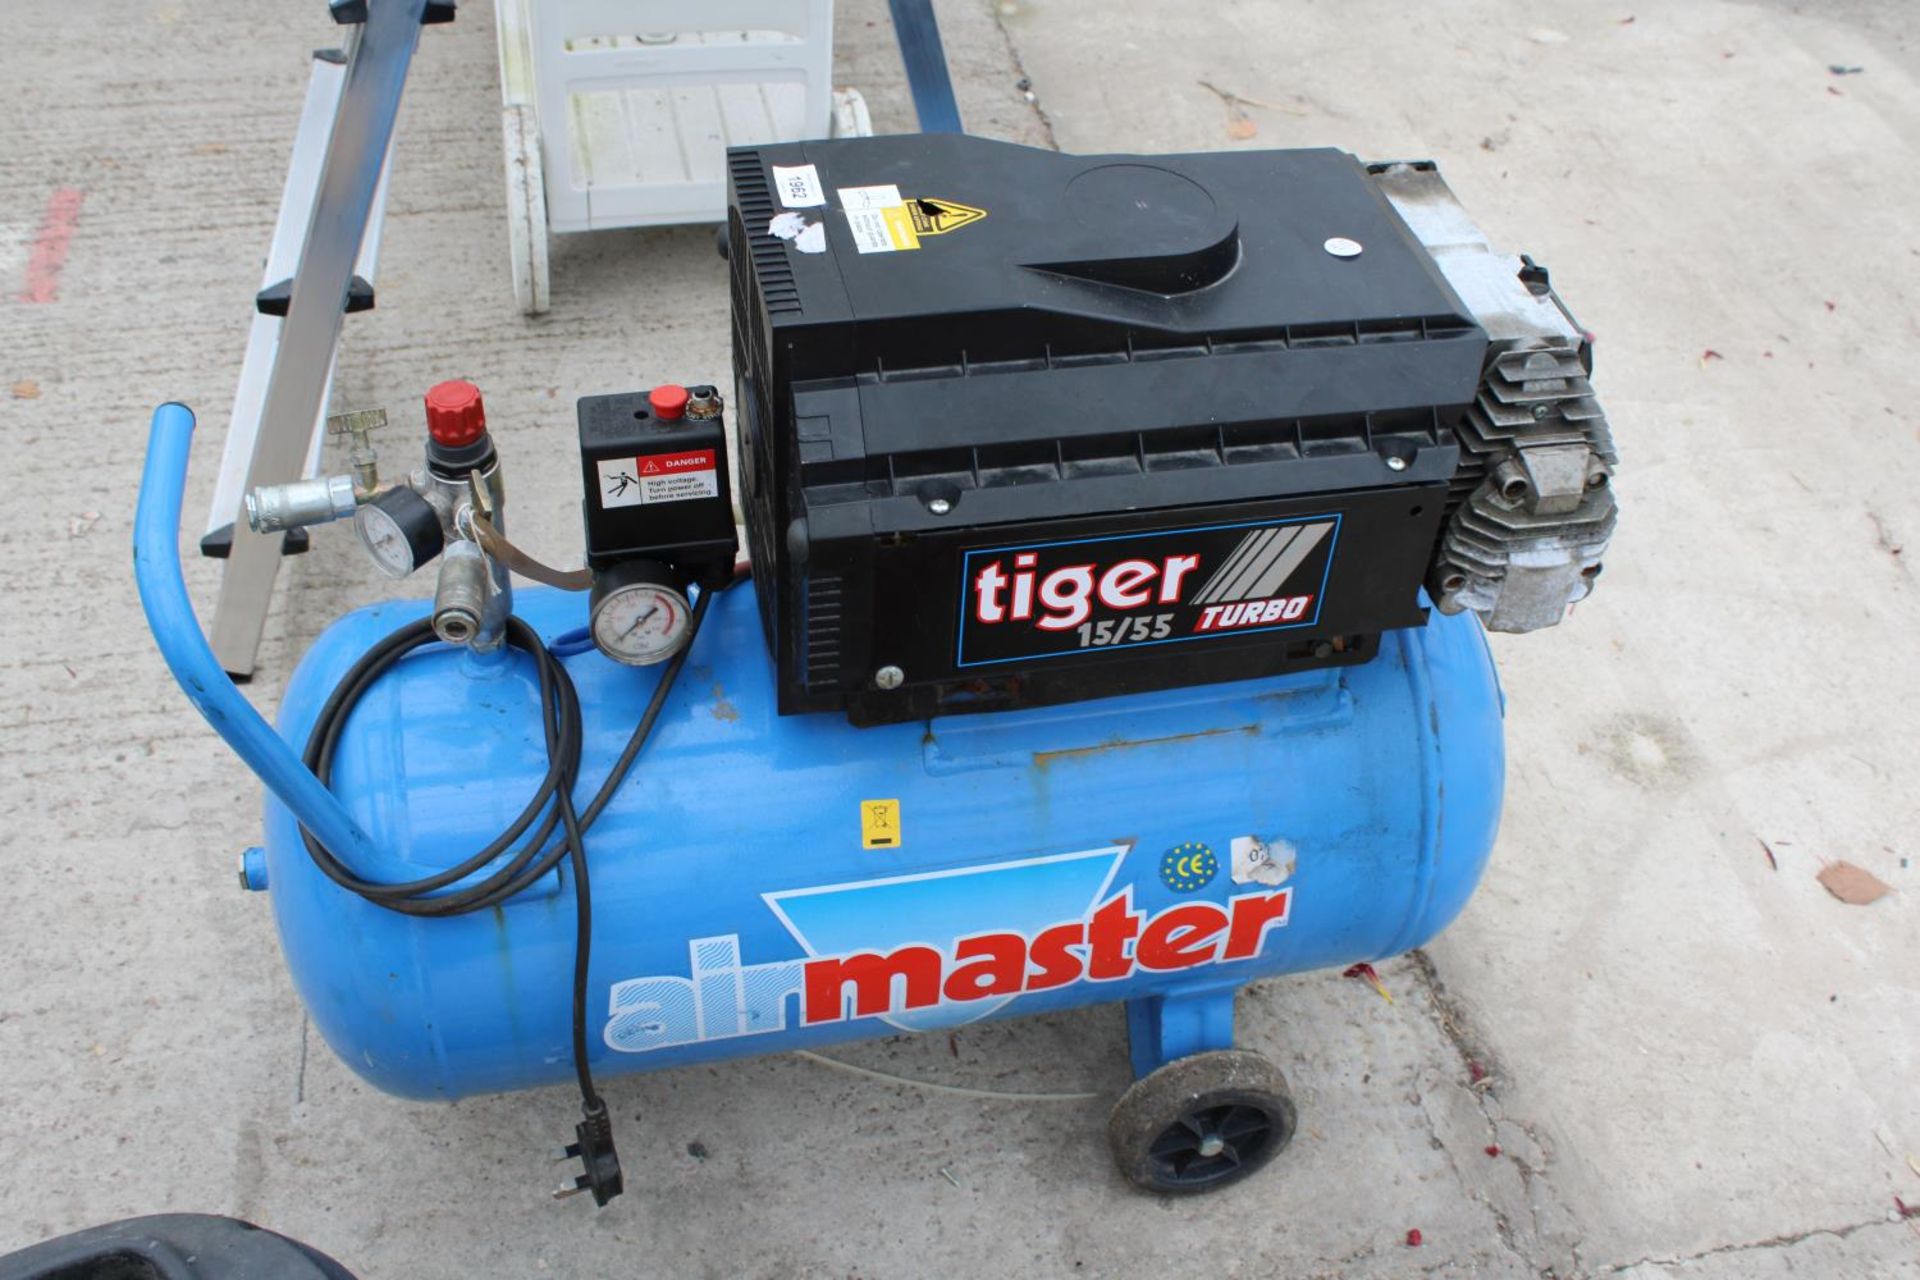 AN AIRMATE TIGER 15/55 TURBO AIR COMPRESSOR - Image 2 of 4